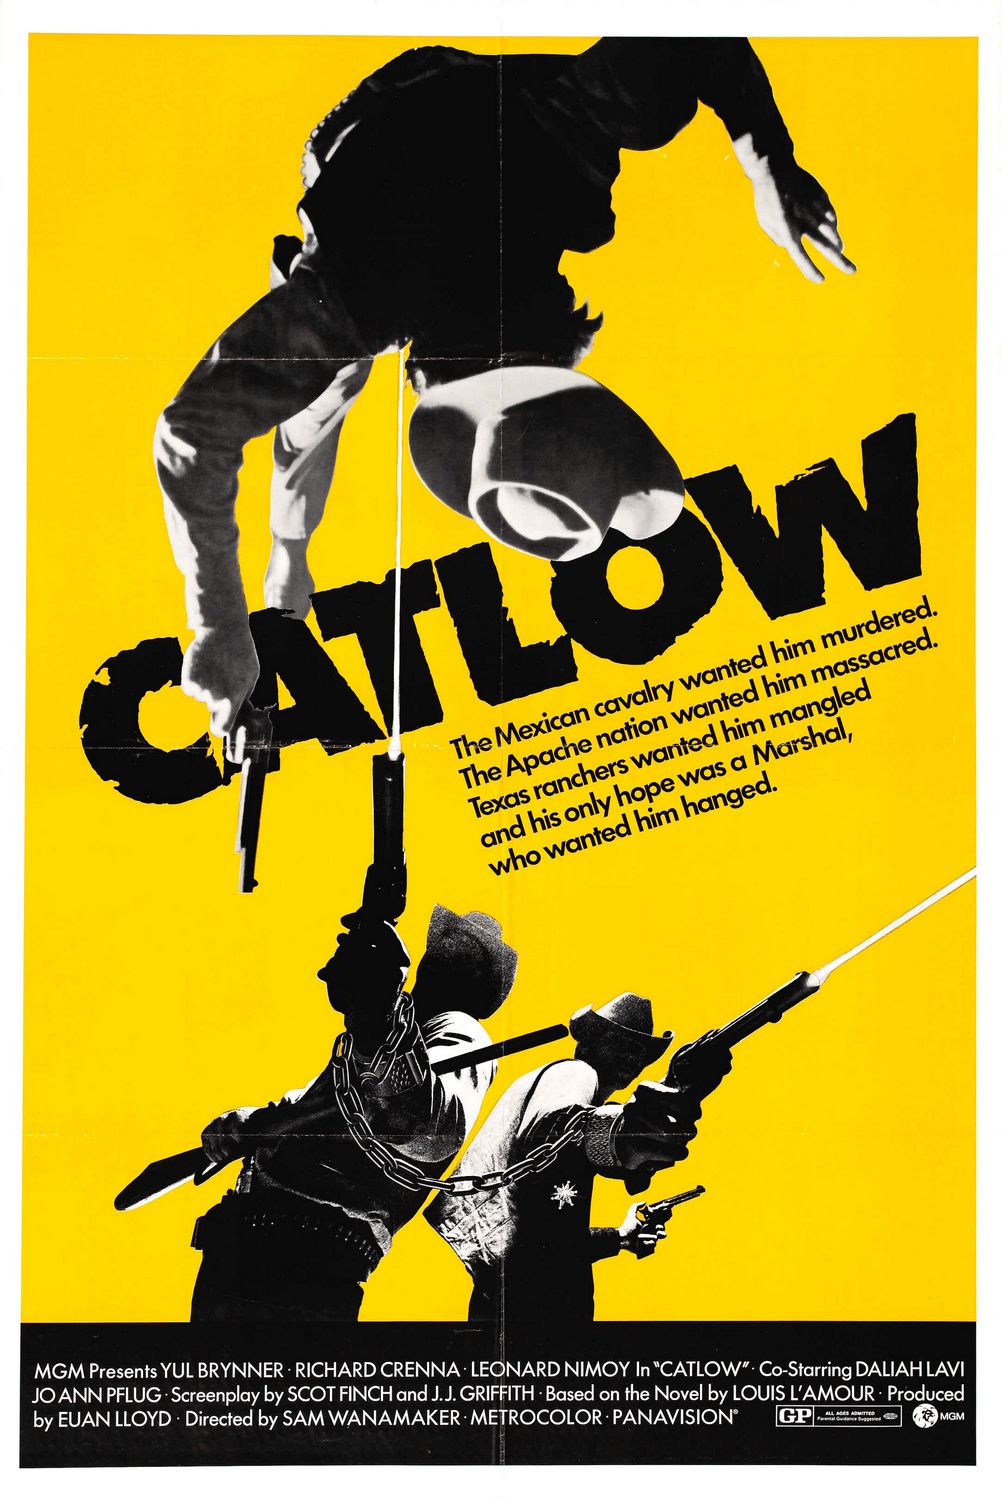 Extra Large Movie Poster Image for Catlow 